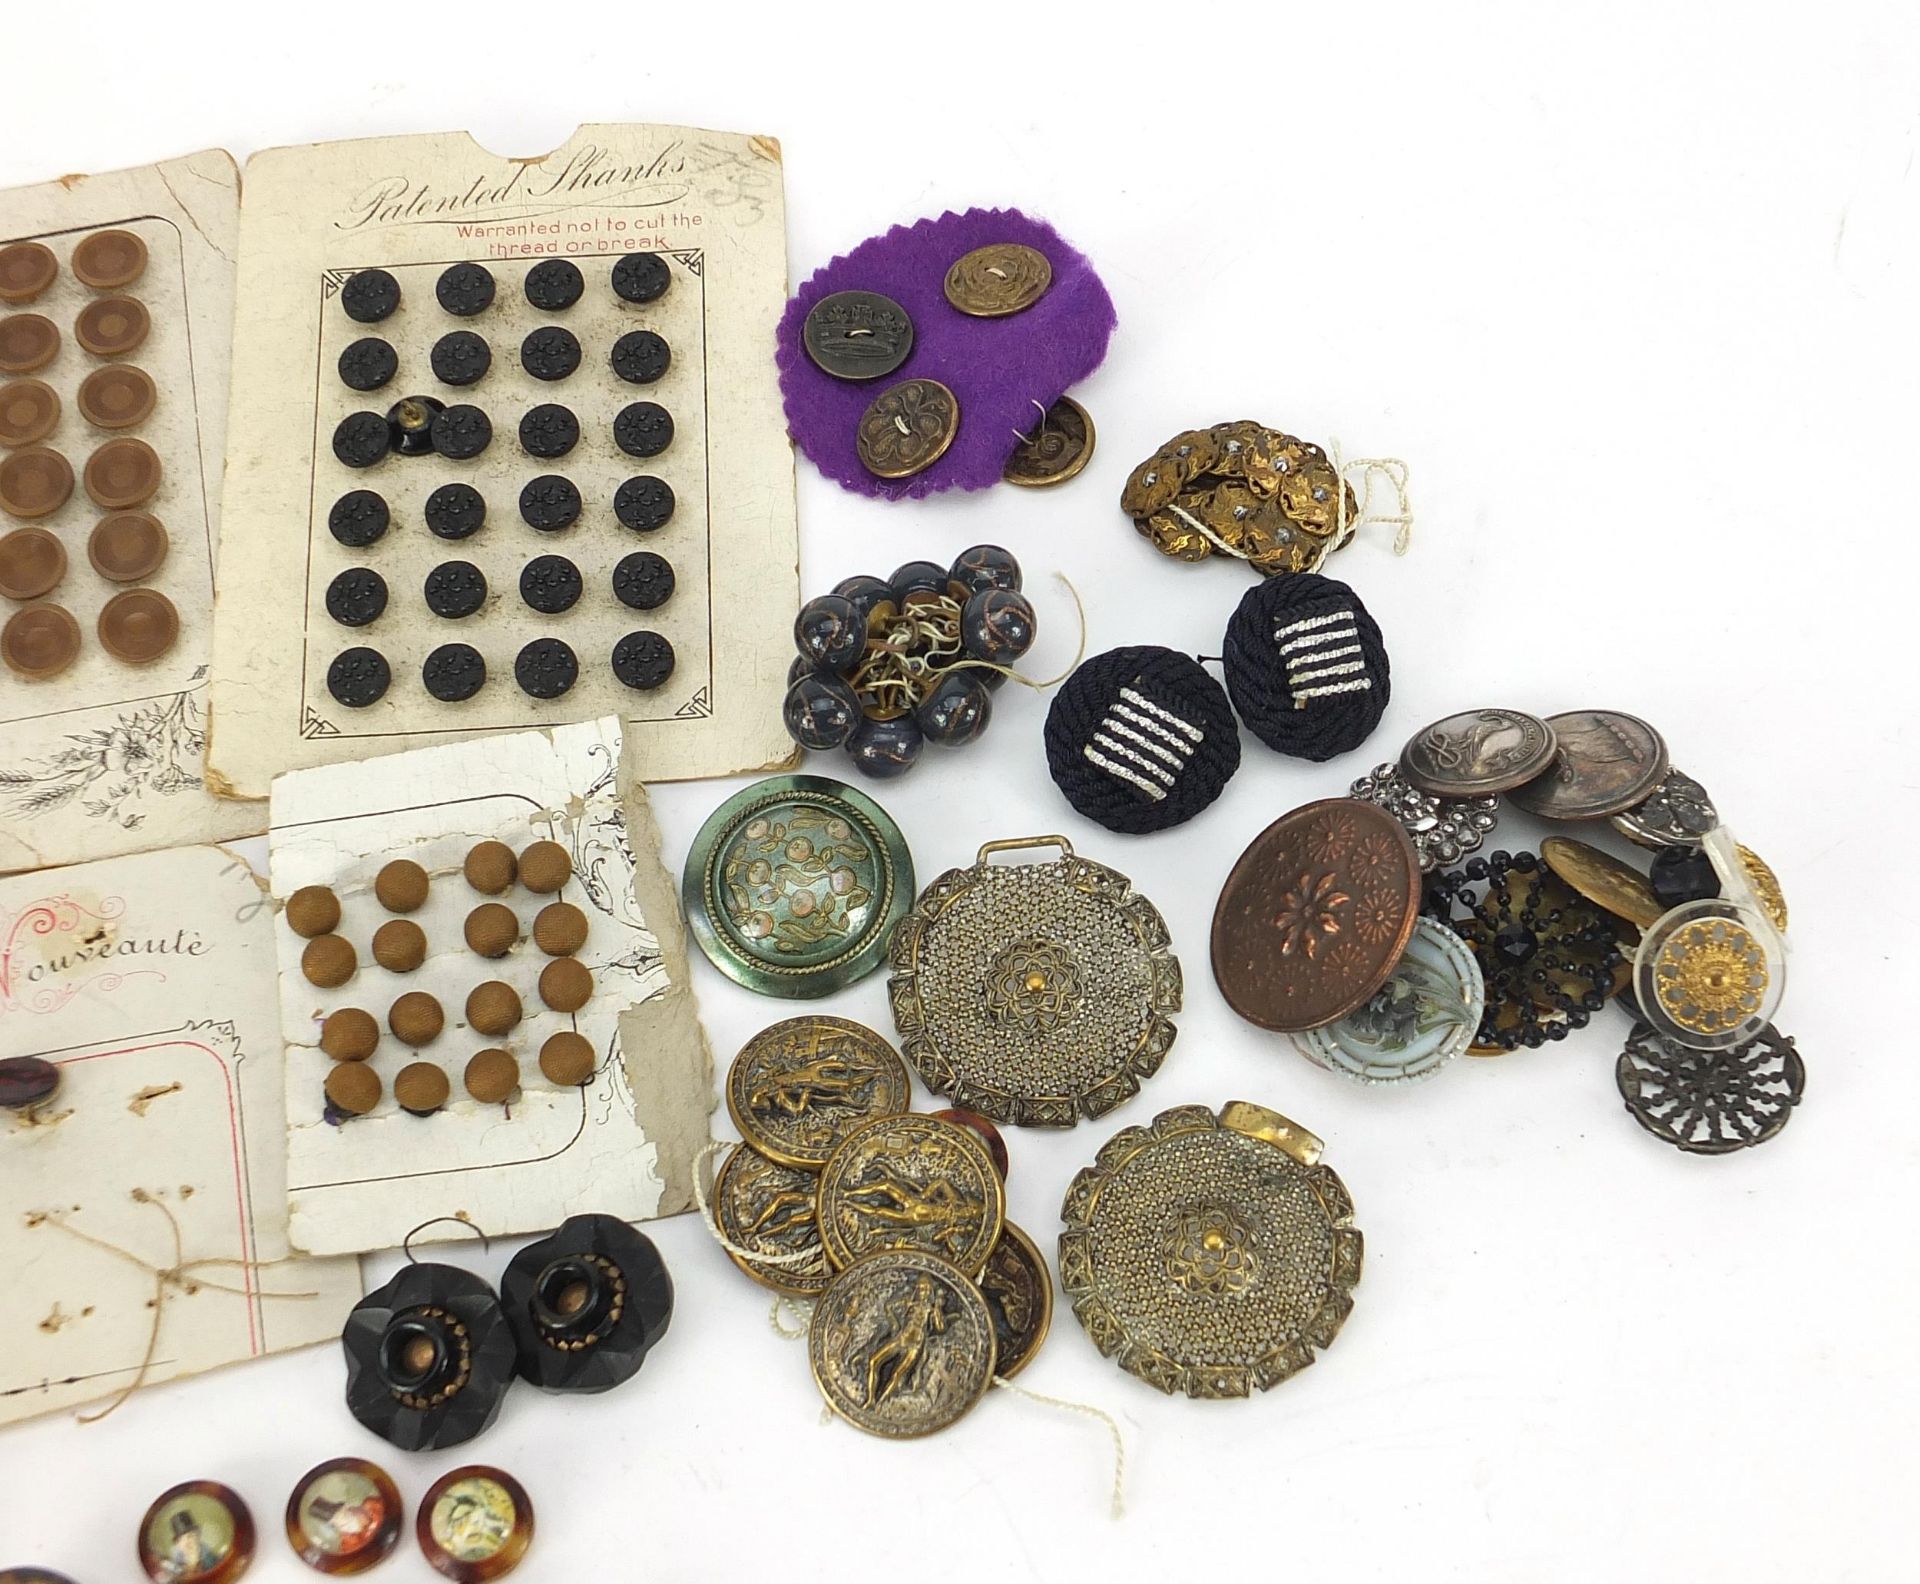 Antique and later buttons including Bakelite, Art Deco and brass examples - Image 4 of 5